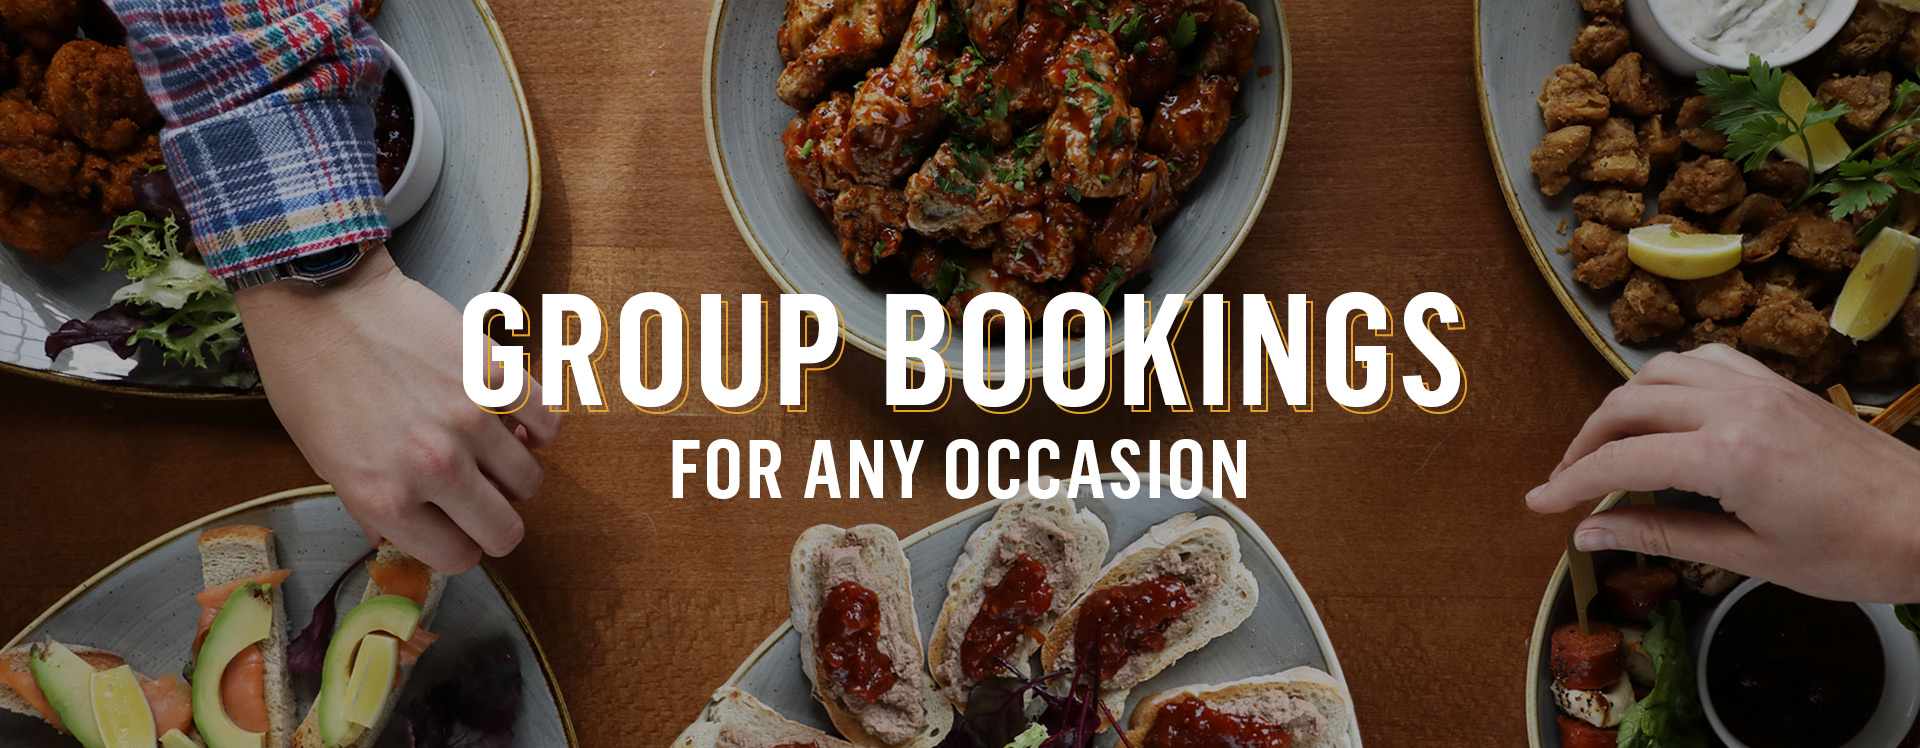 Group Bookings at The Globe